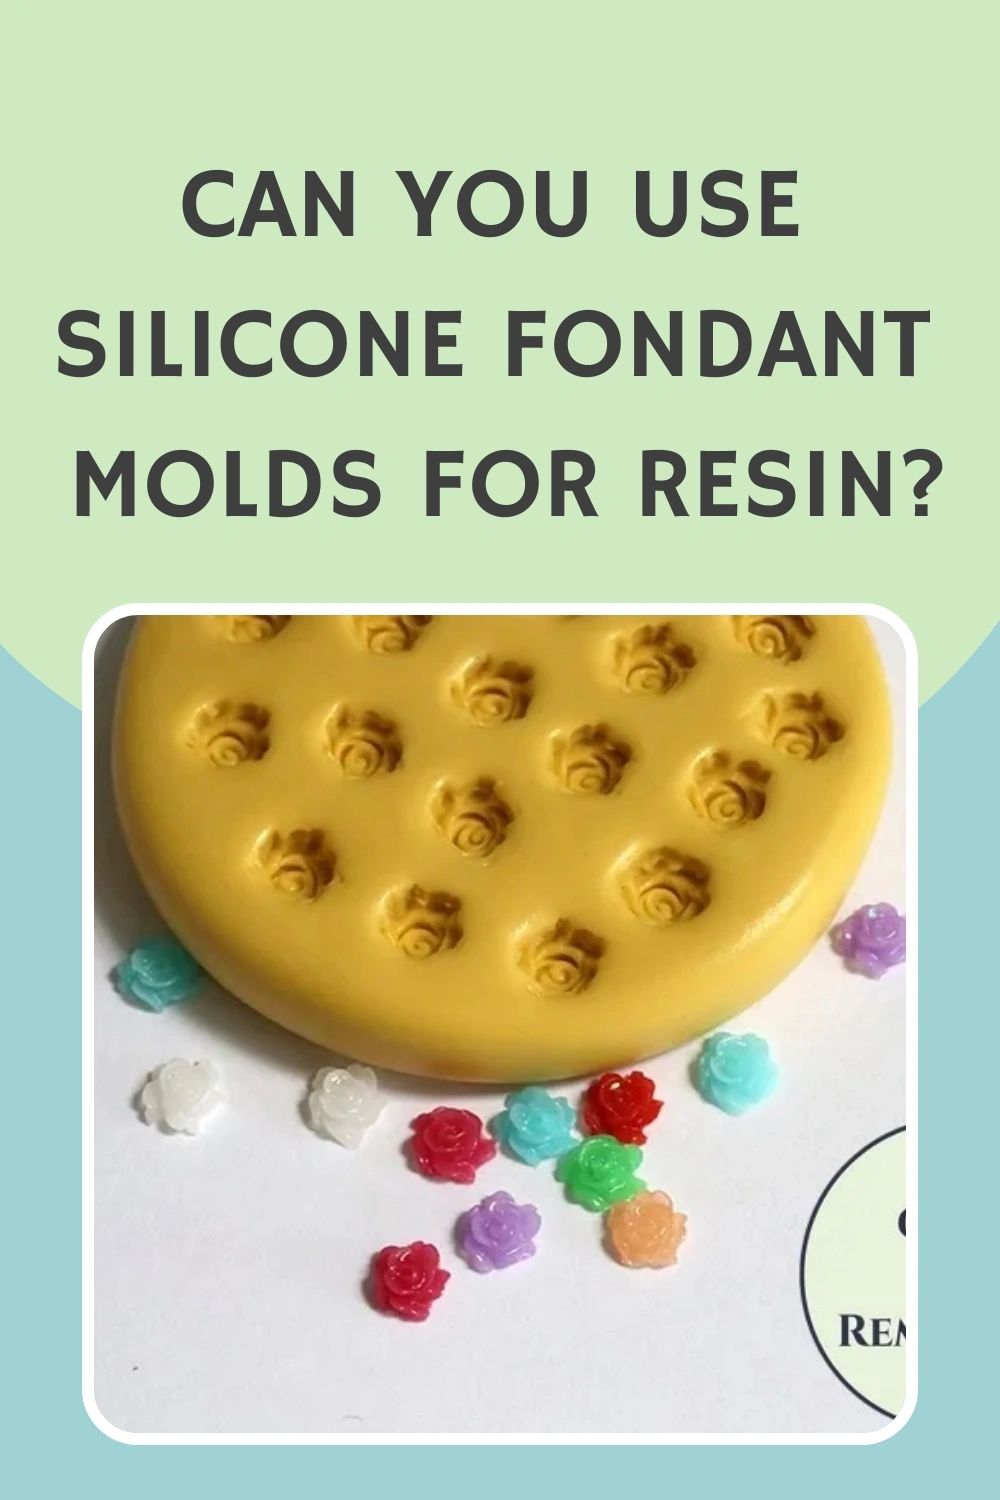 https://img1.wsimg.com/isteam/ip/2e67919d-5f98-41a3-921e-2716f8646f4c/Can-You-Use-Silicone-Fondant-Molds-For-Resin-.jpeg